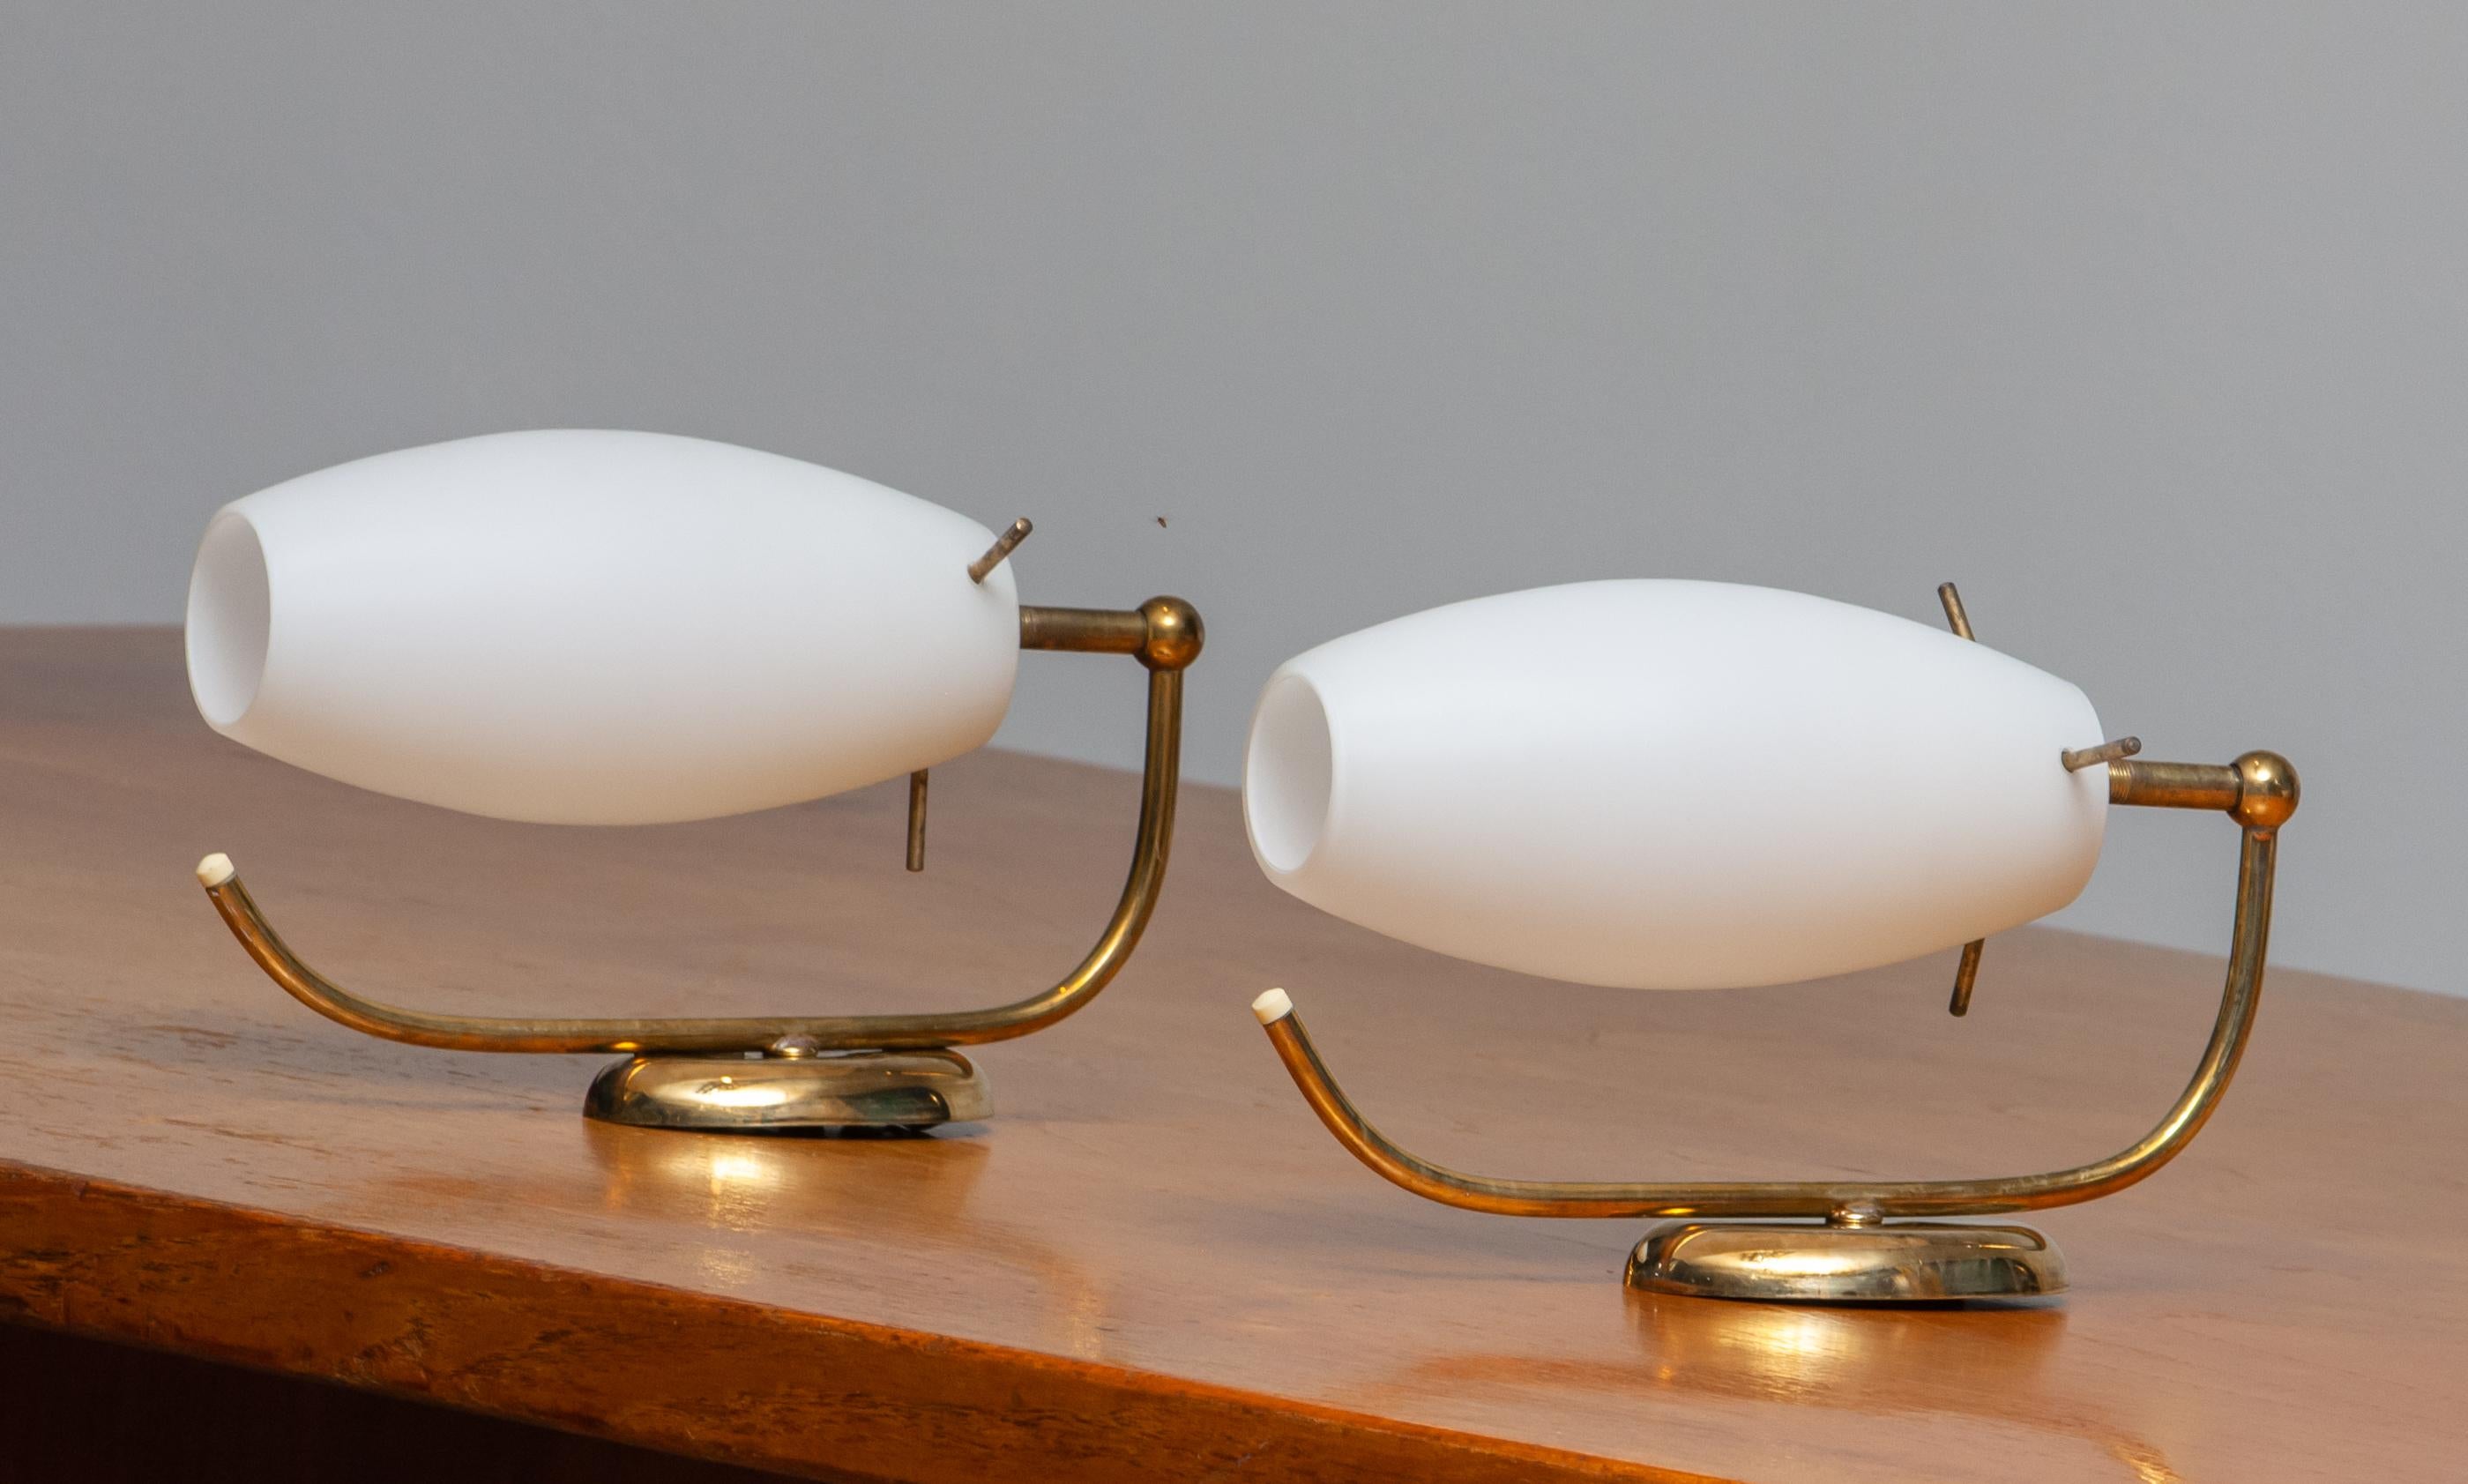 Beautiful set of two brass wall lights / lamps from the 1950s opaline vases made by Stilnovo Lainate Milan, Italy.
Technically 100% and the overall condition is good.
Bulb size is E 14 / E17 and suits 110 volts and 230 volts.
Note that we have